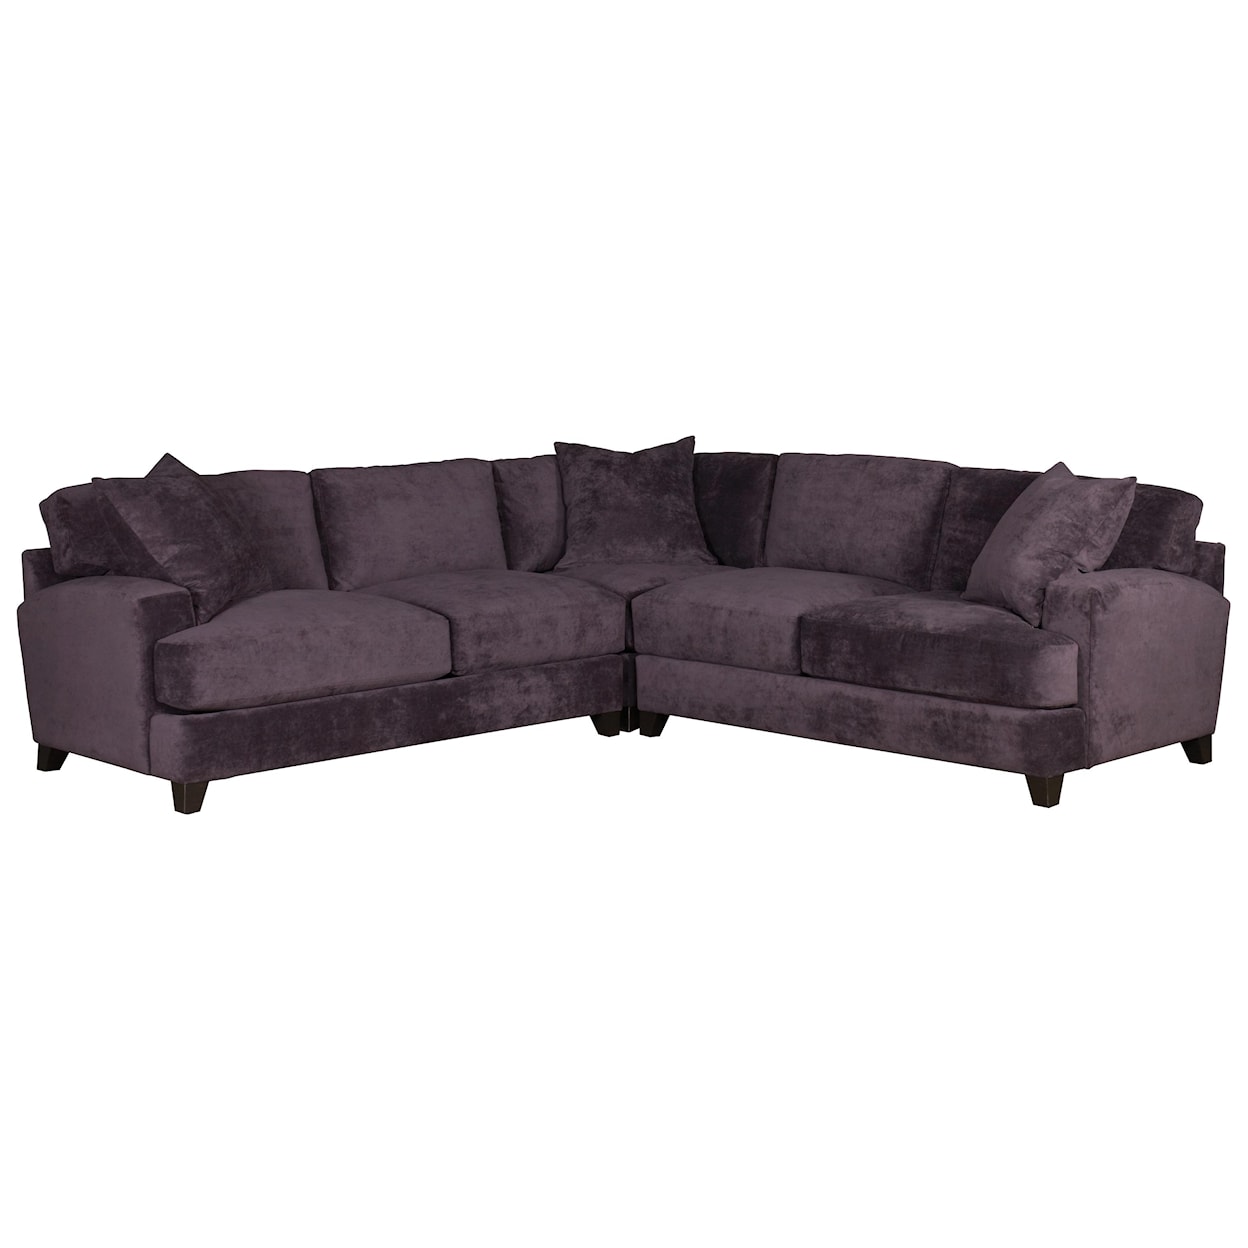 Jonathan Louis Clarence 4 pc. Sectional